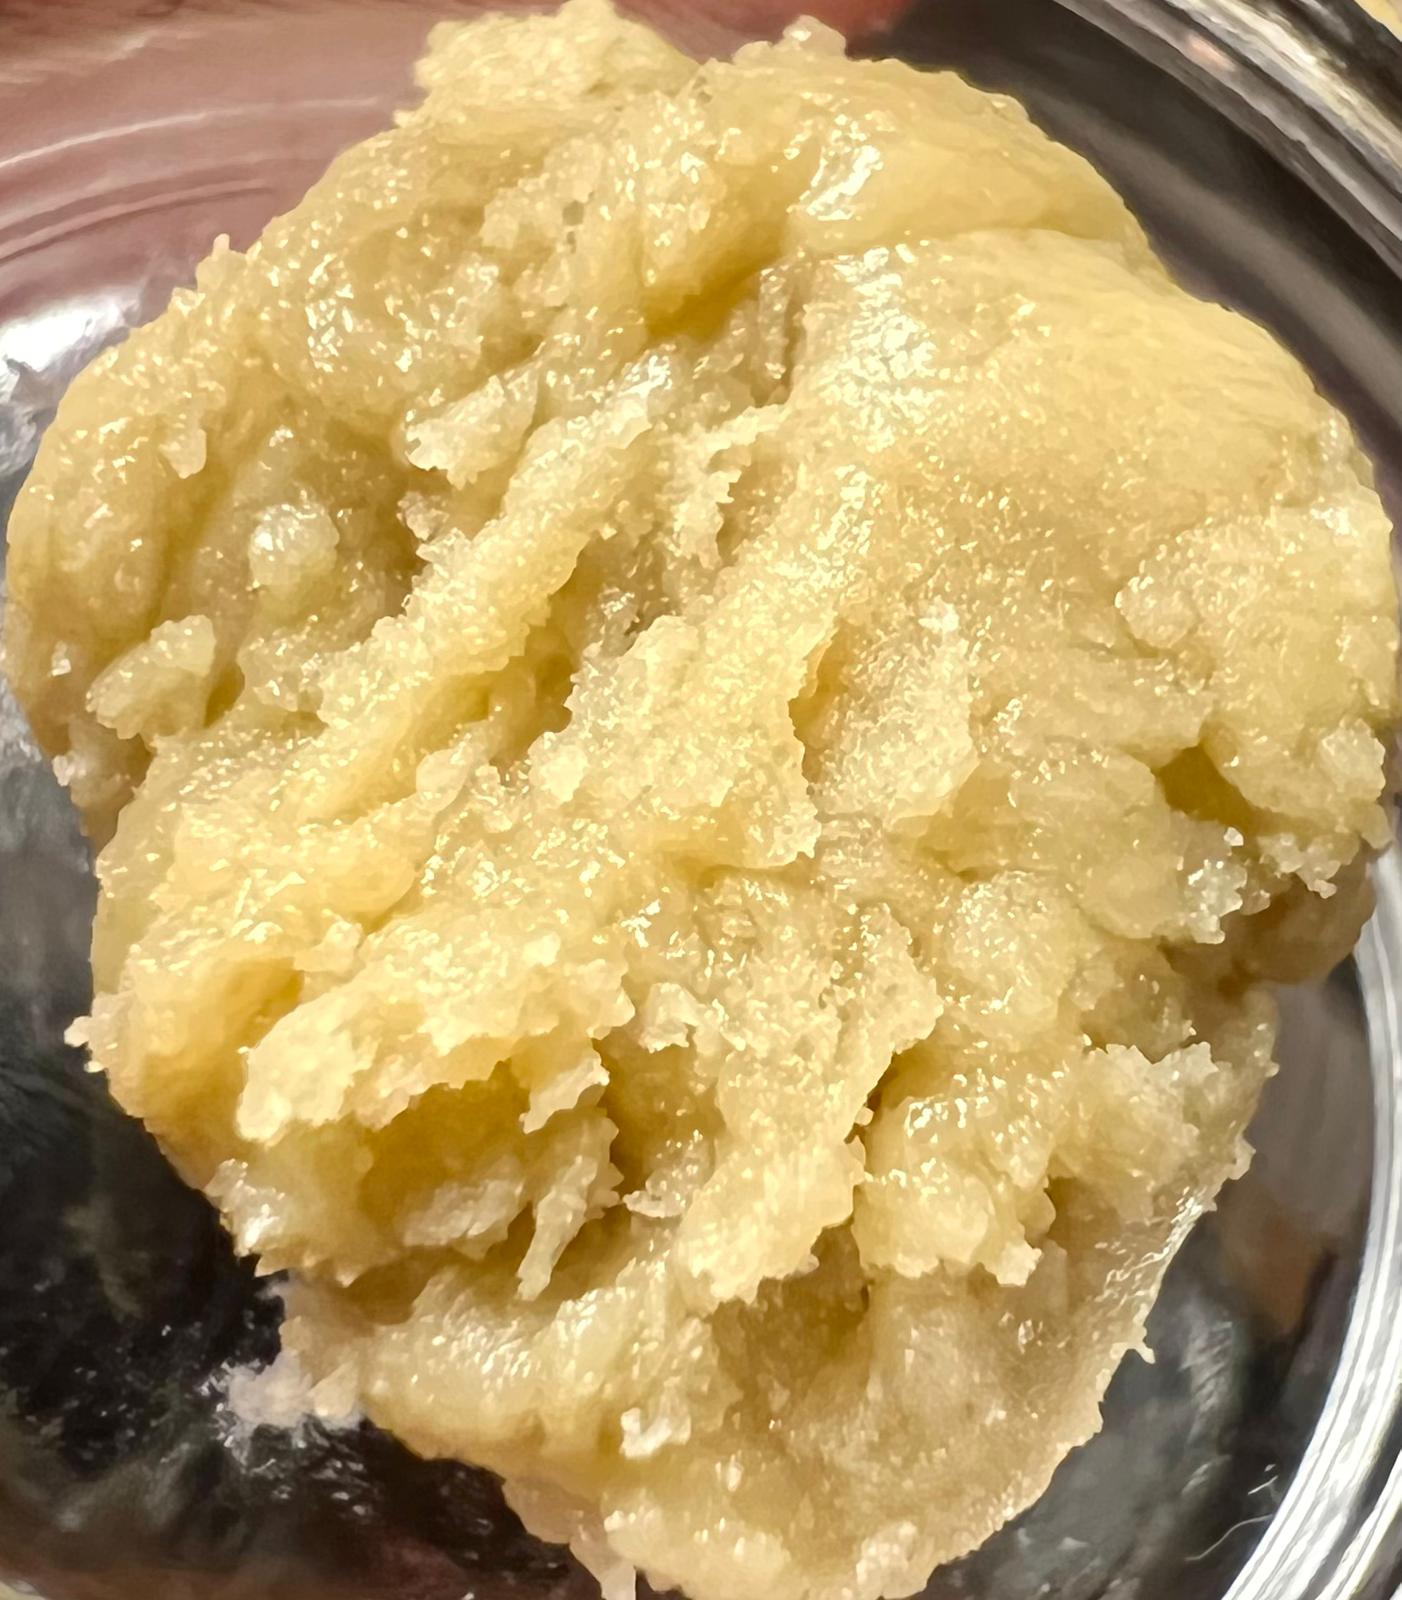 Live rosin (solventless) extract from CryoSift.